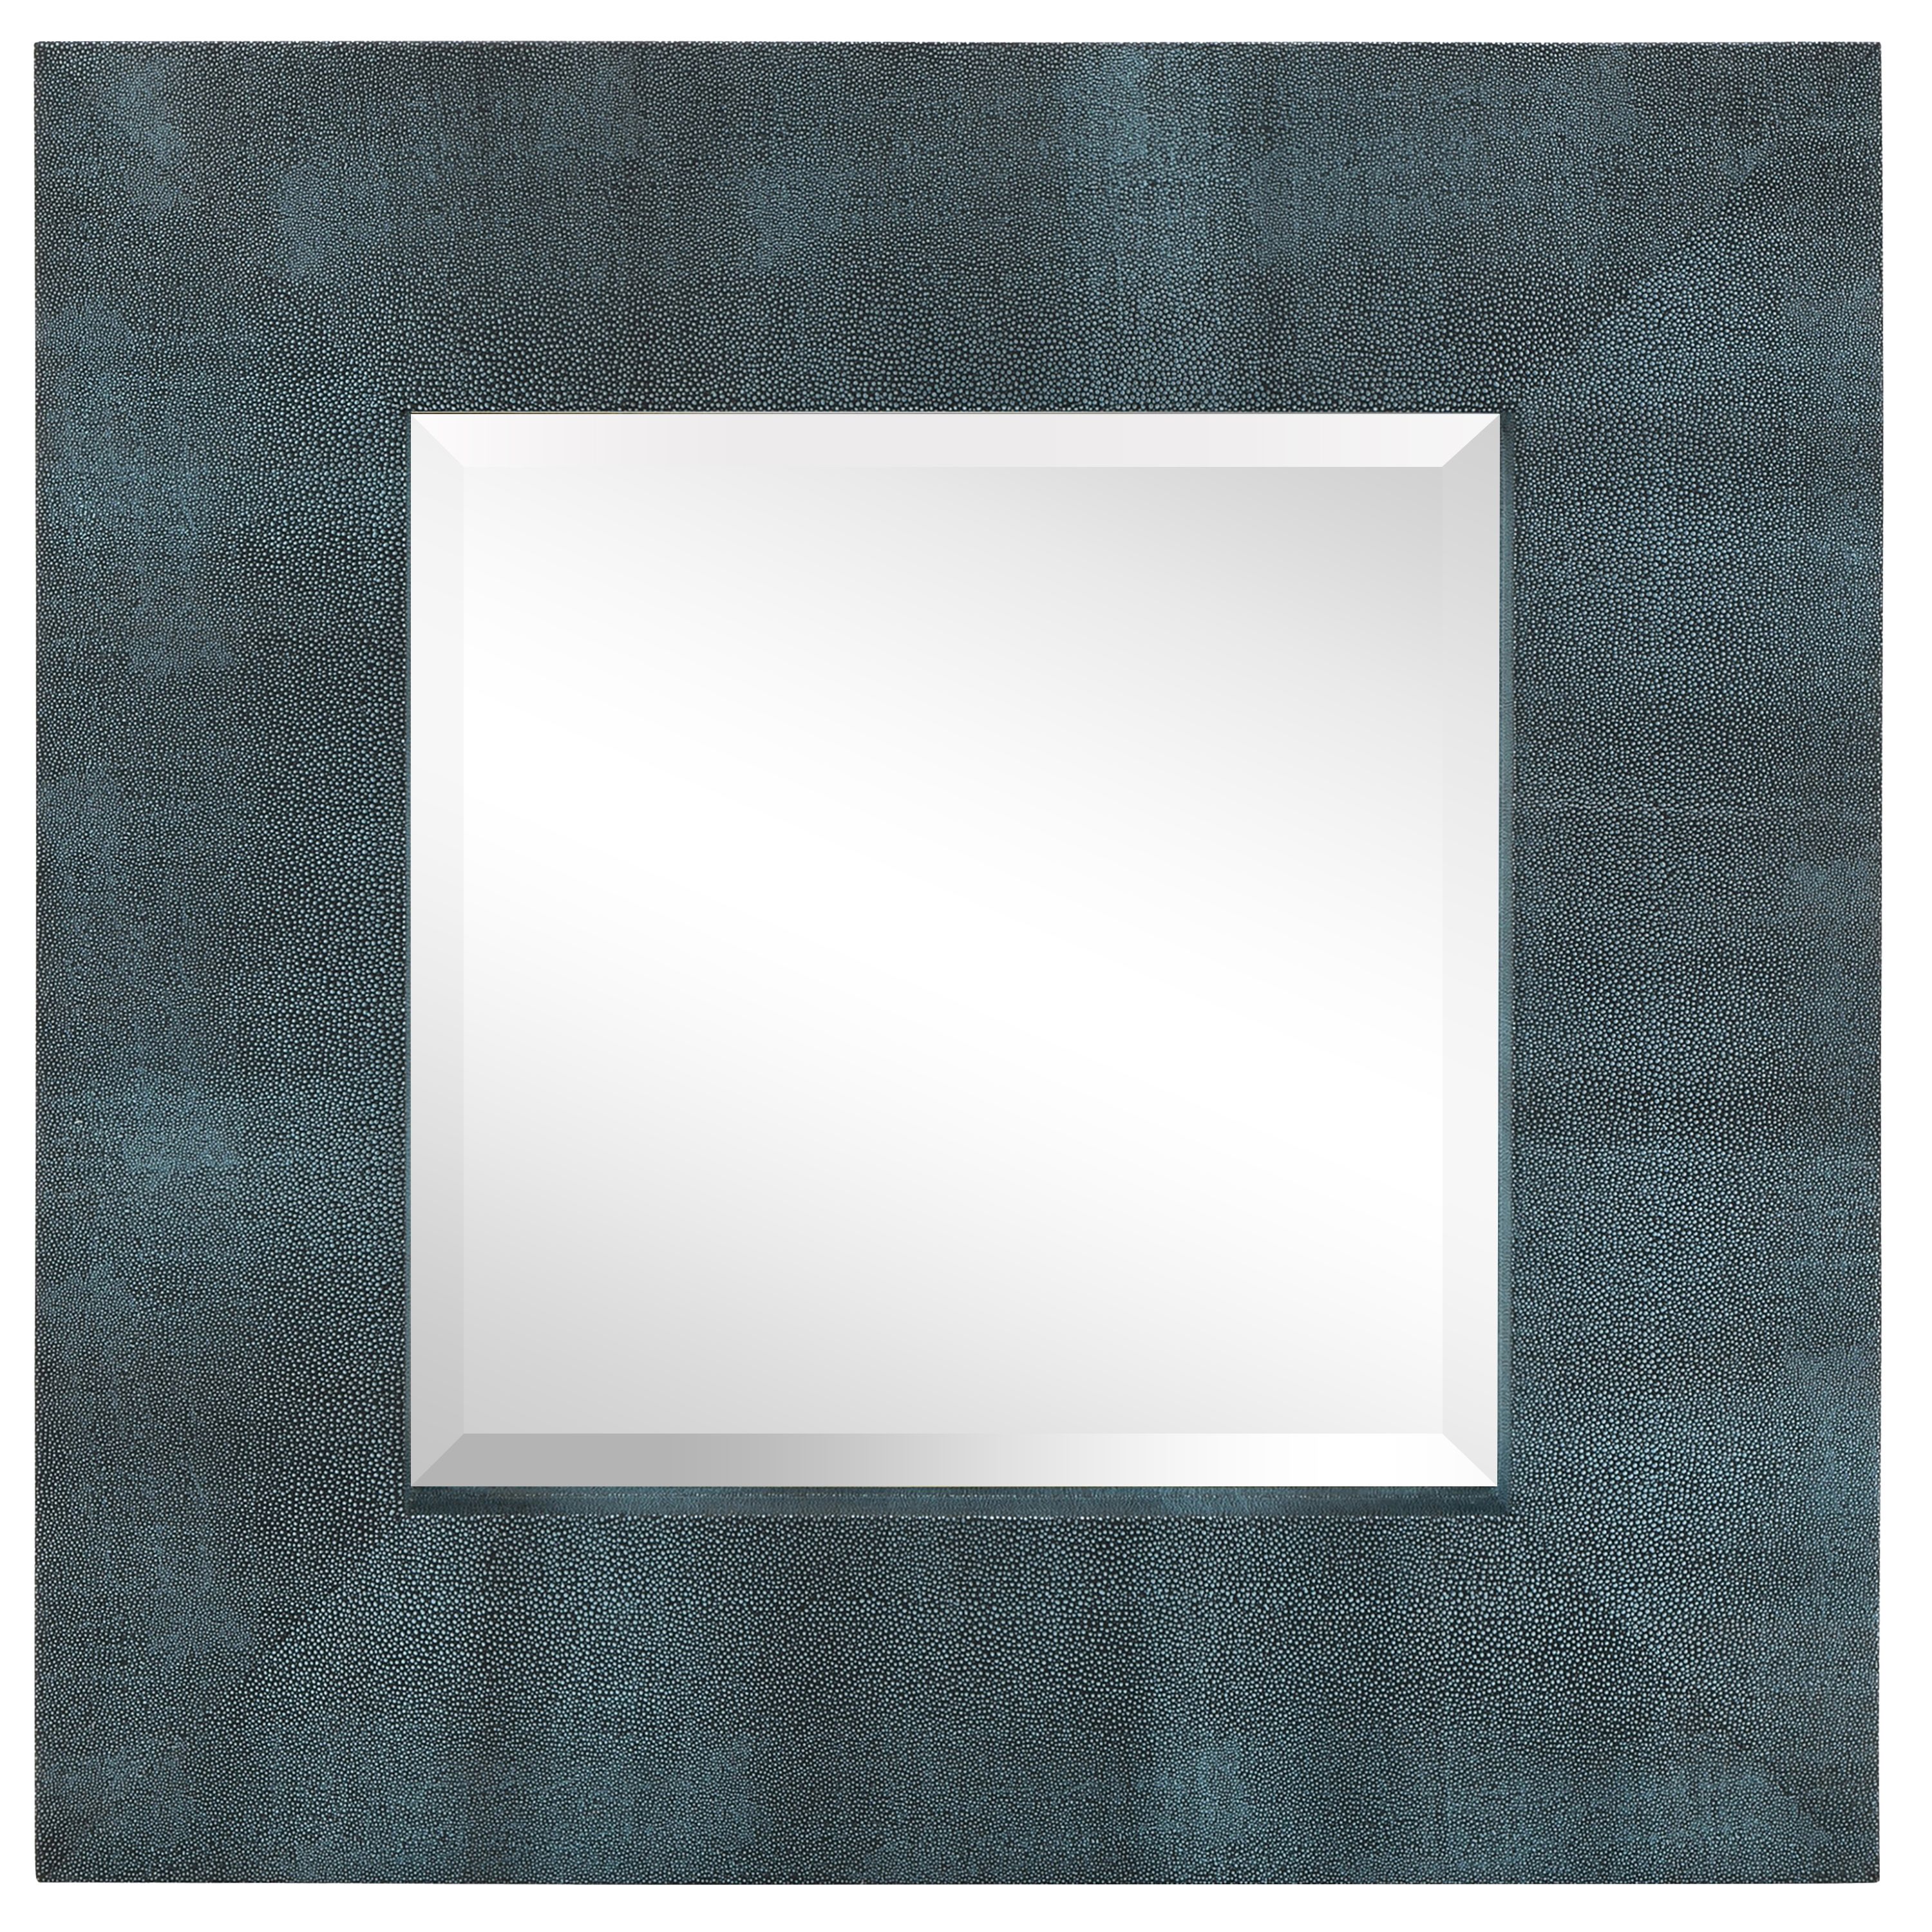 Elm-3030-01bbl 30 X 30 In. Black On Blue Metallic Shagreen Leather Framed Occasional Beveled Mirror